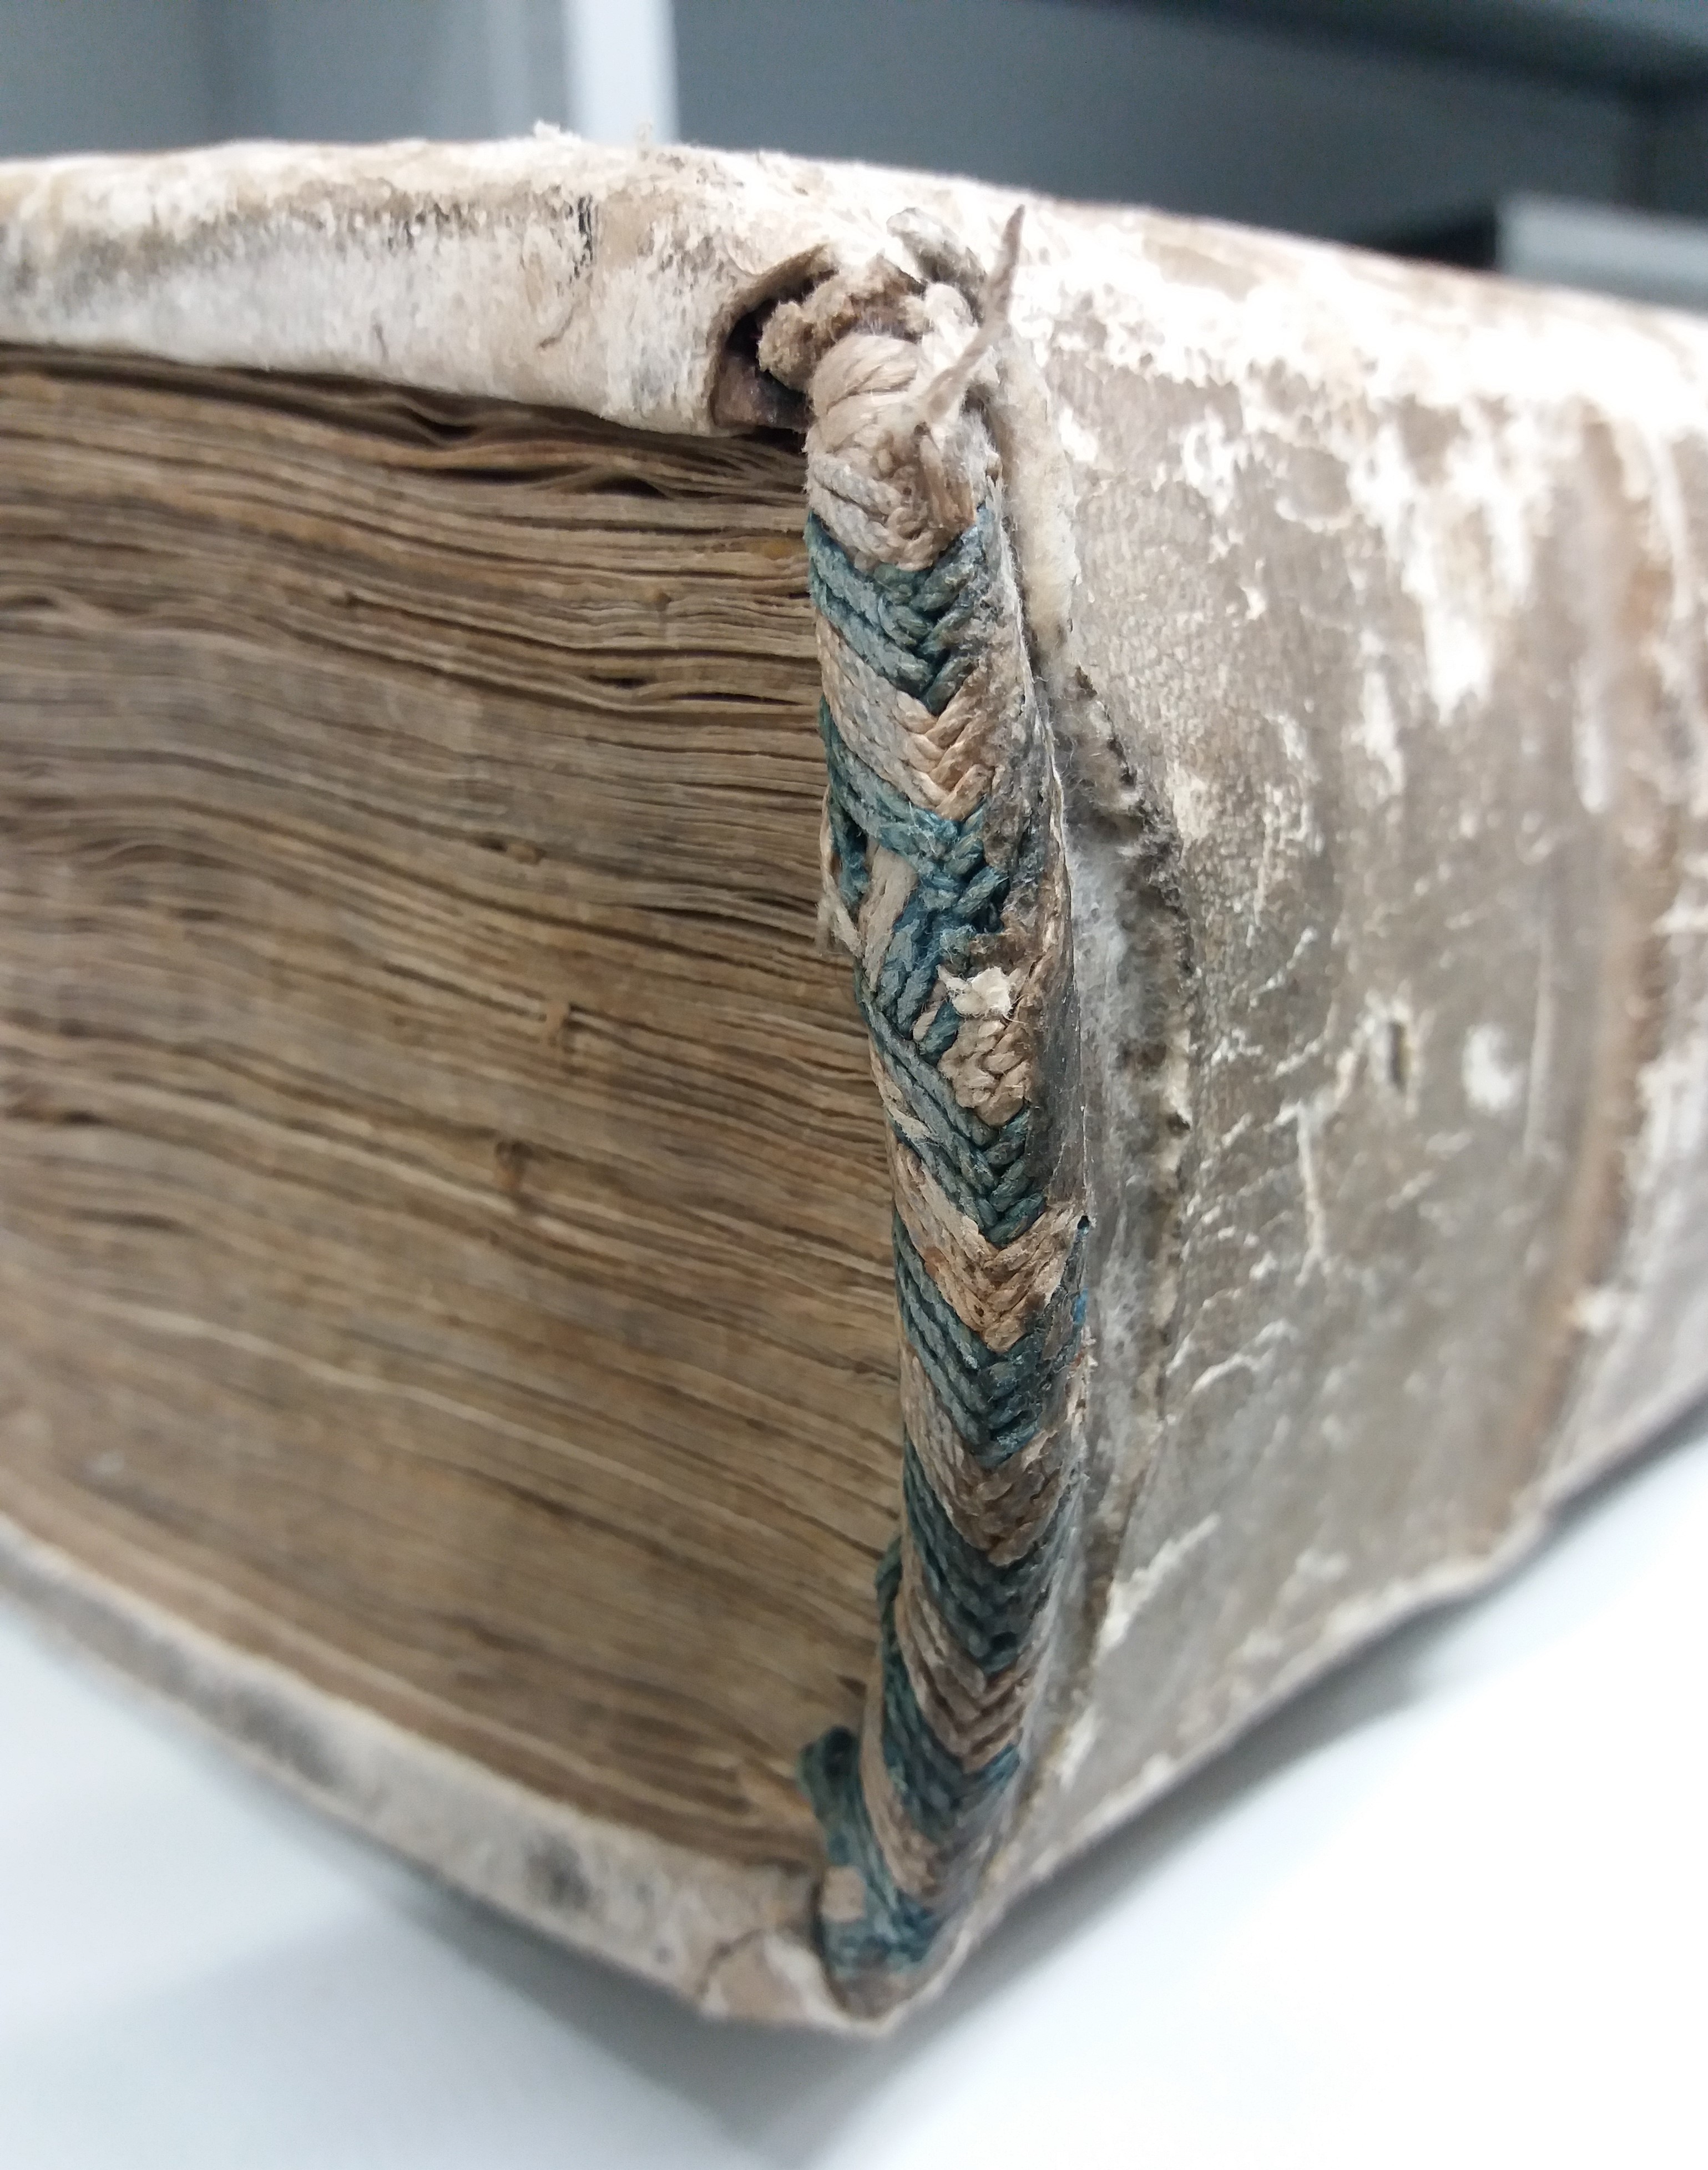 Cod. Graz, UB, Ms 198, showing a 12th century herringbone endband in blue and off-white linen or hemp thread. (image courtesy of the authors and the University of Graz)